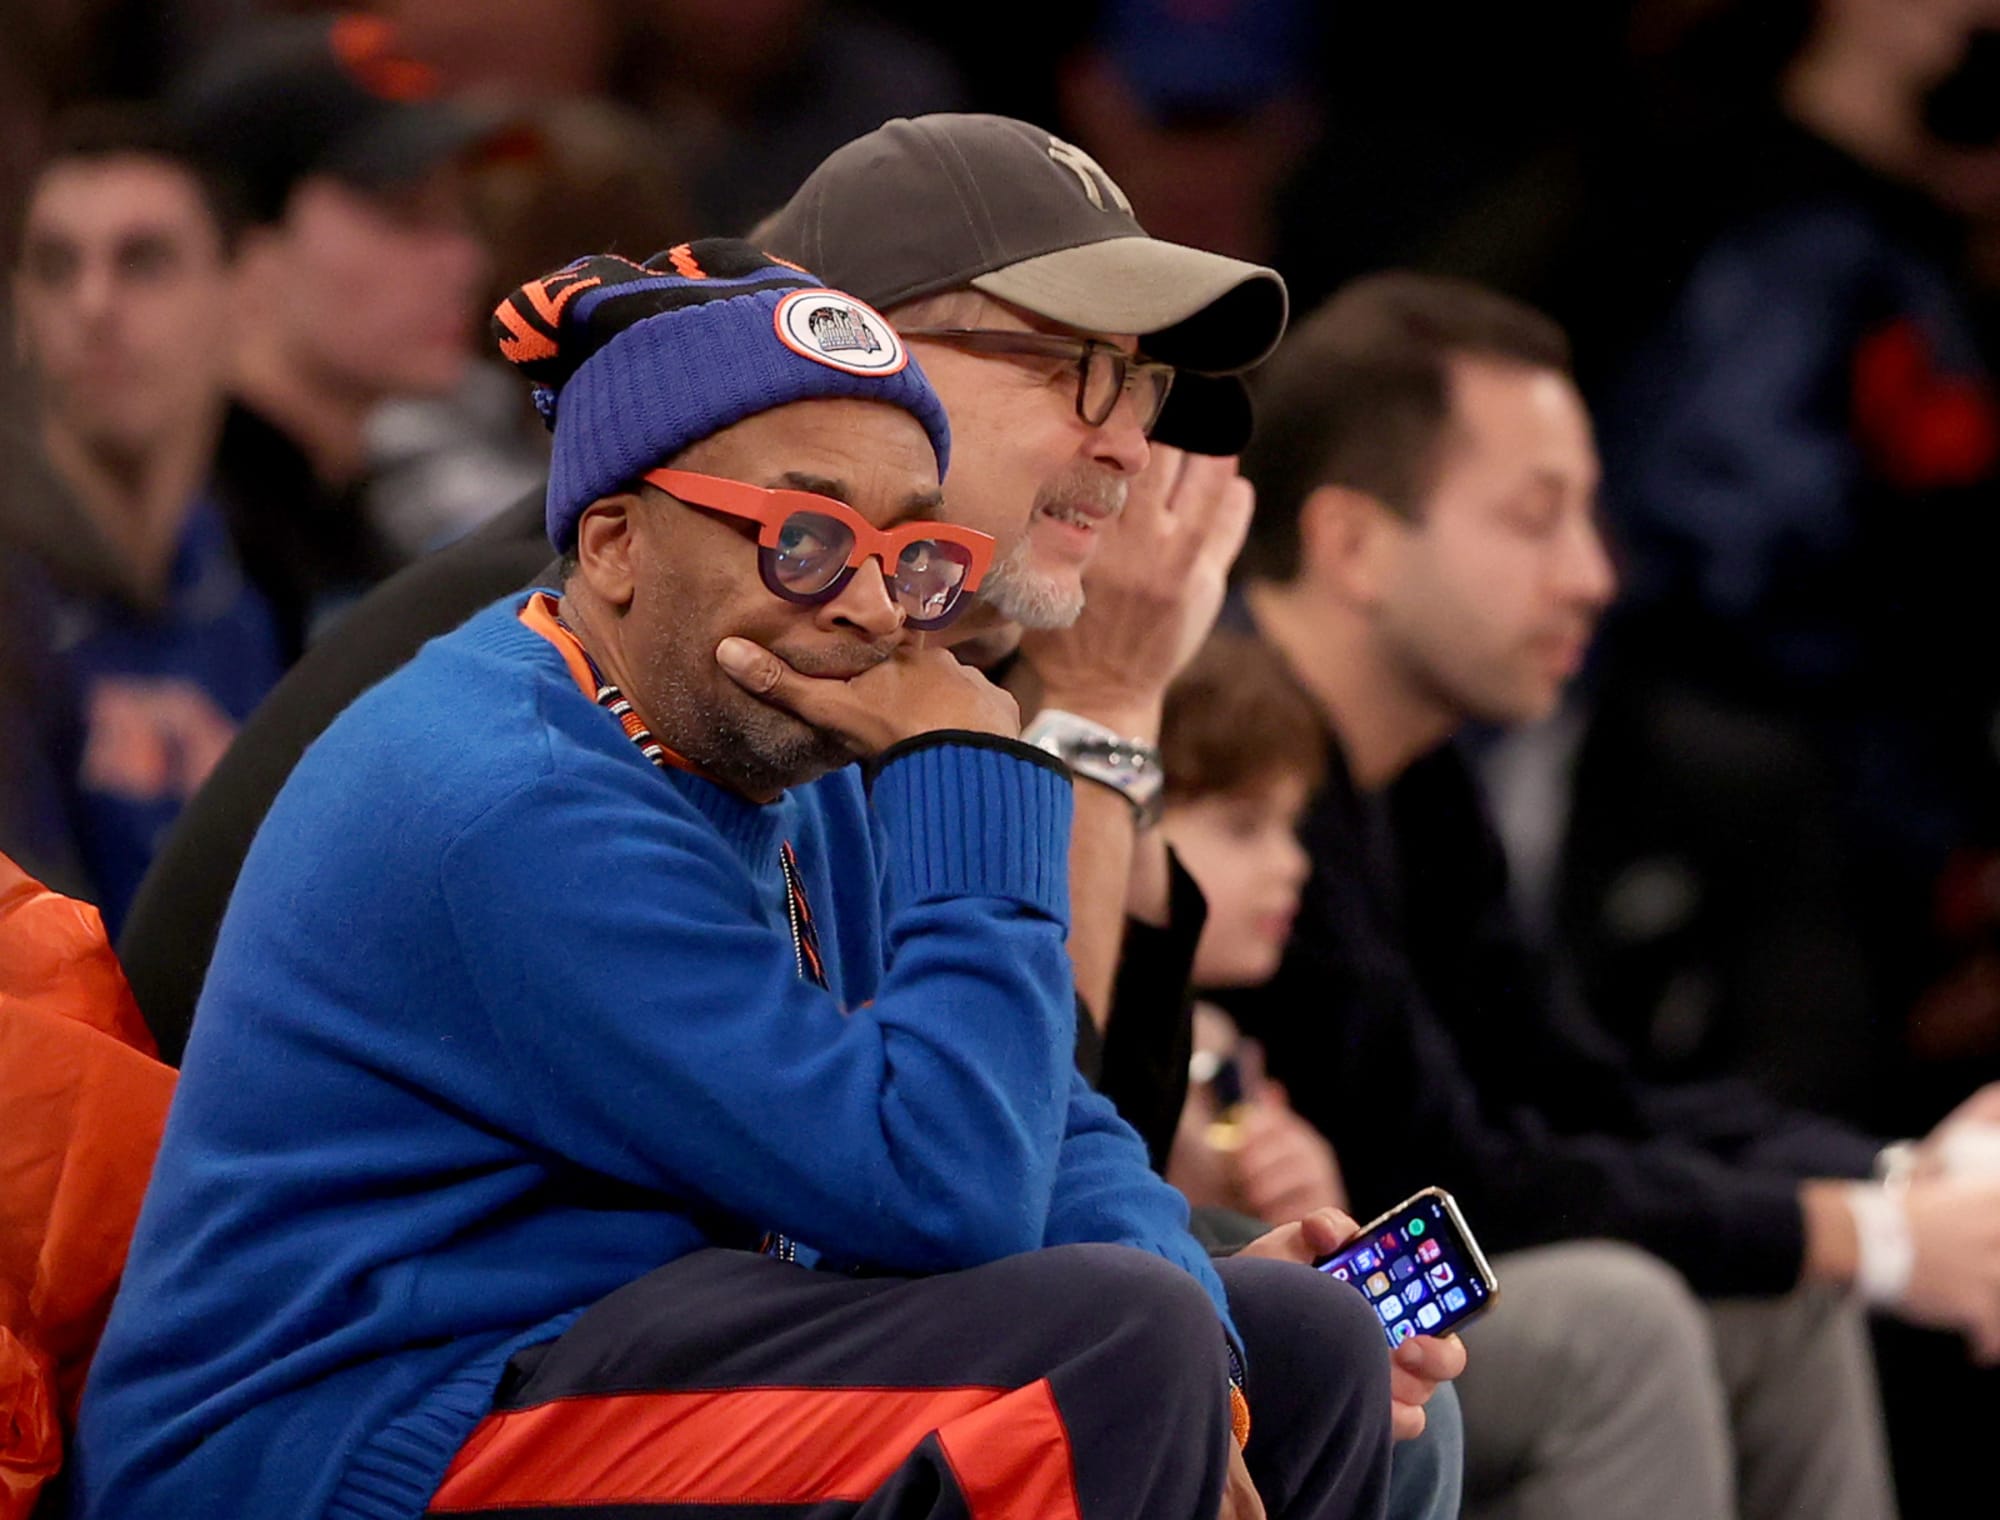 Spike Lee riles up controversy after cheering for Knicks' rival in